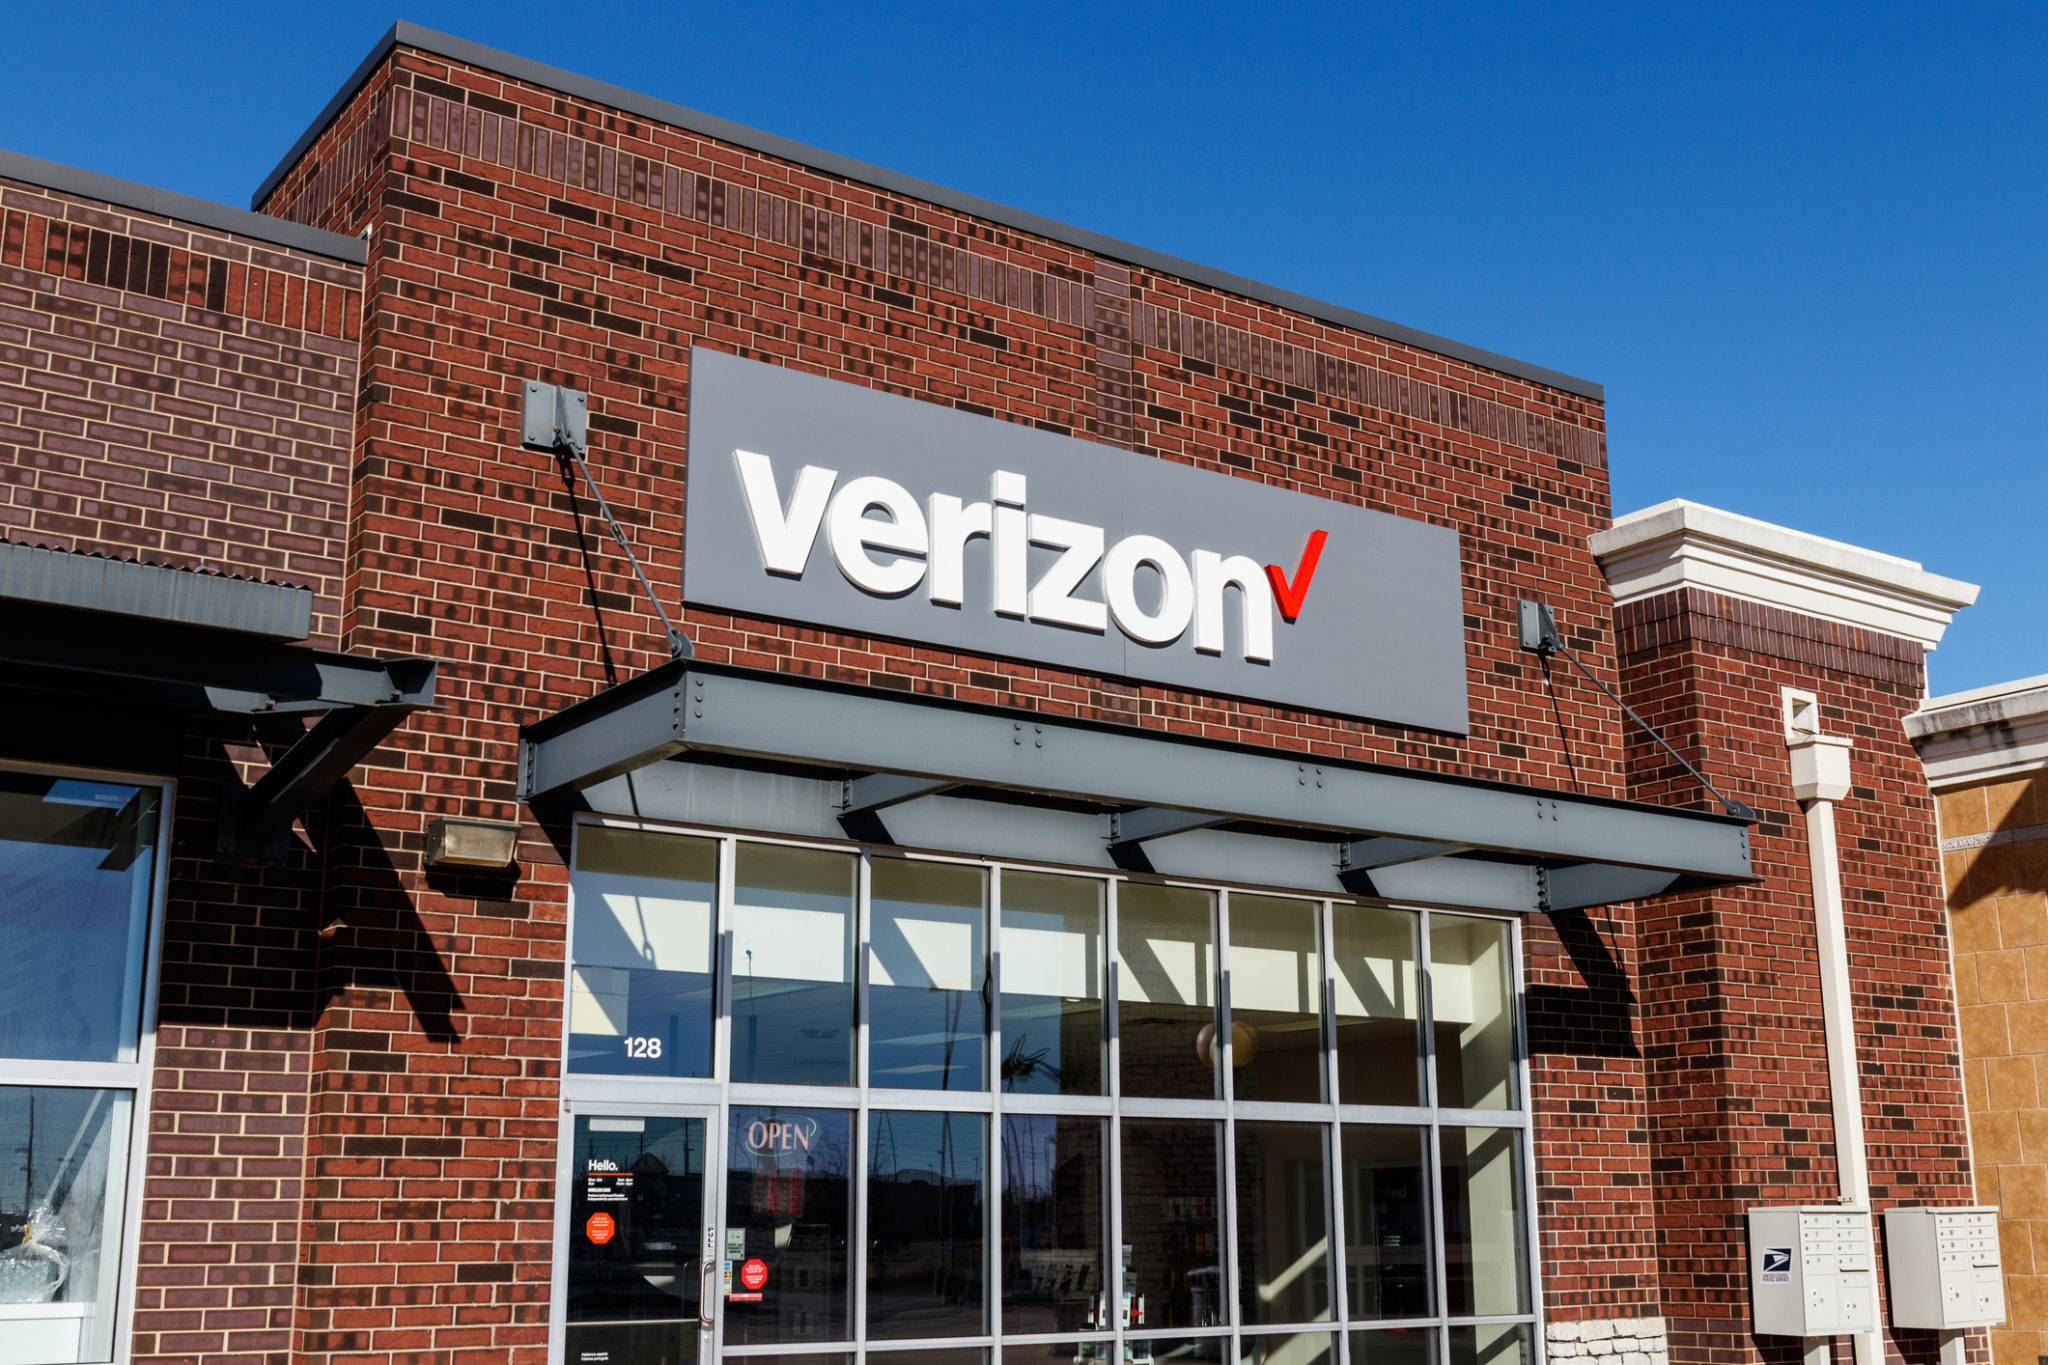 Verizon’s 5G Home Internet Plan Will Reportedly Be Going Up In Price